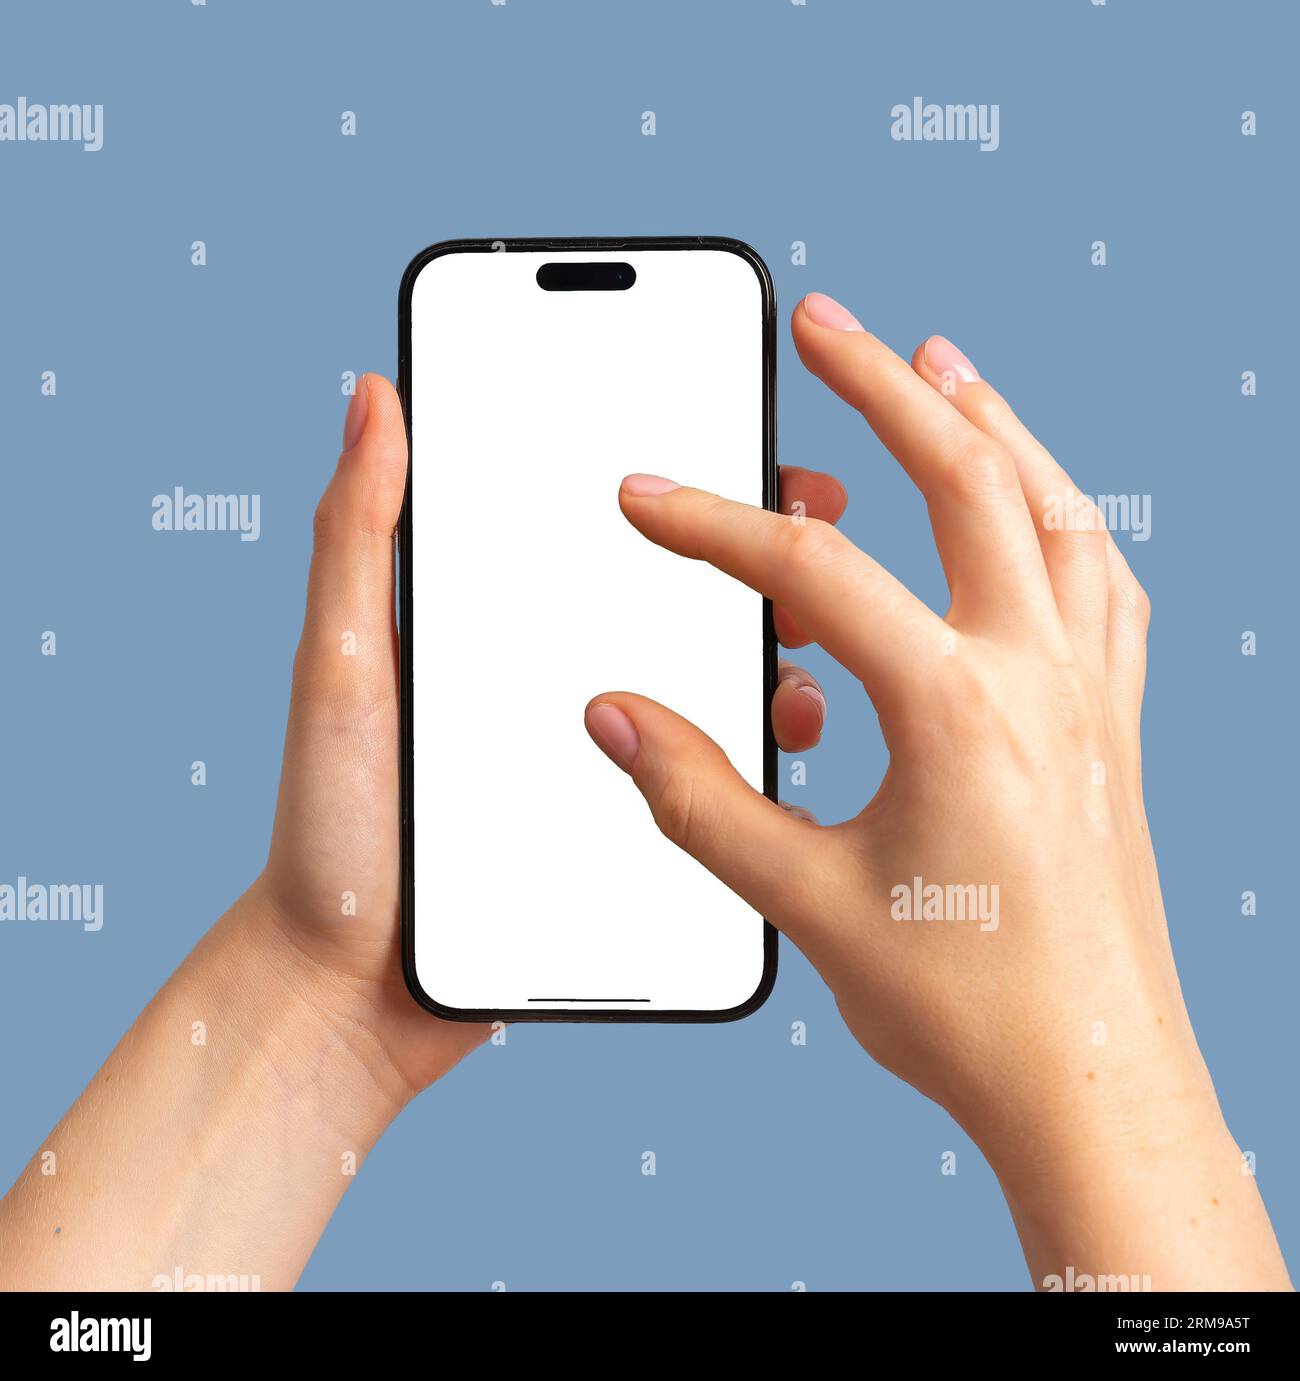 Hand gesture on smart phone screen, tapping with two fingers, zooming photo on mobile display mockup. Stock Photo